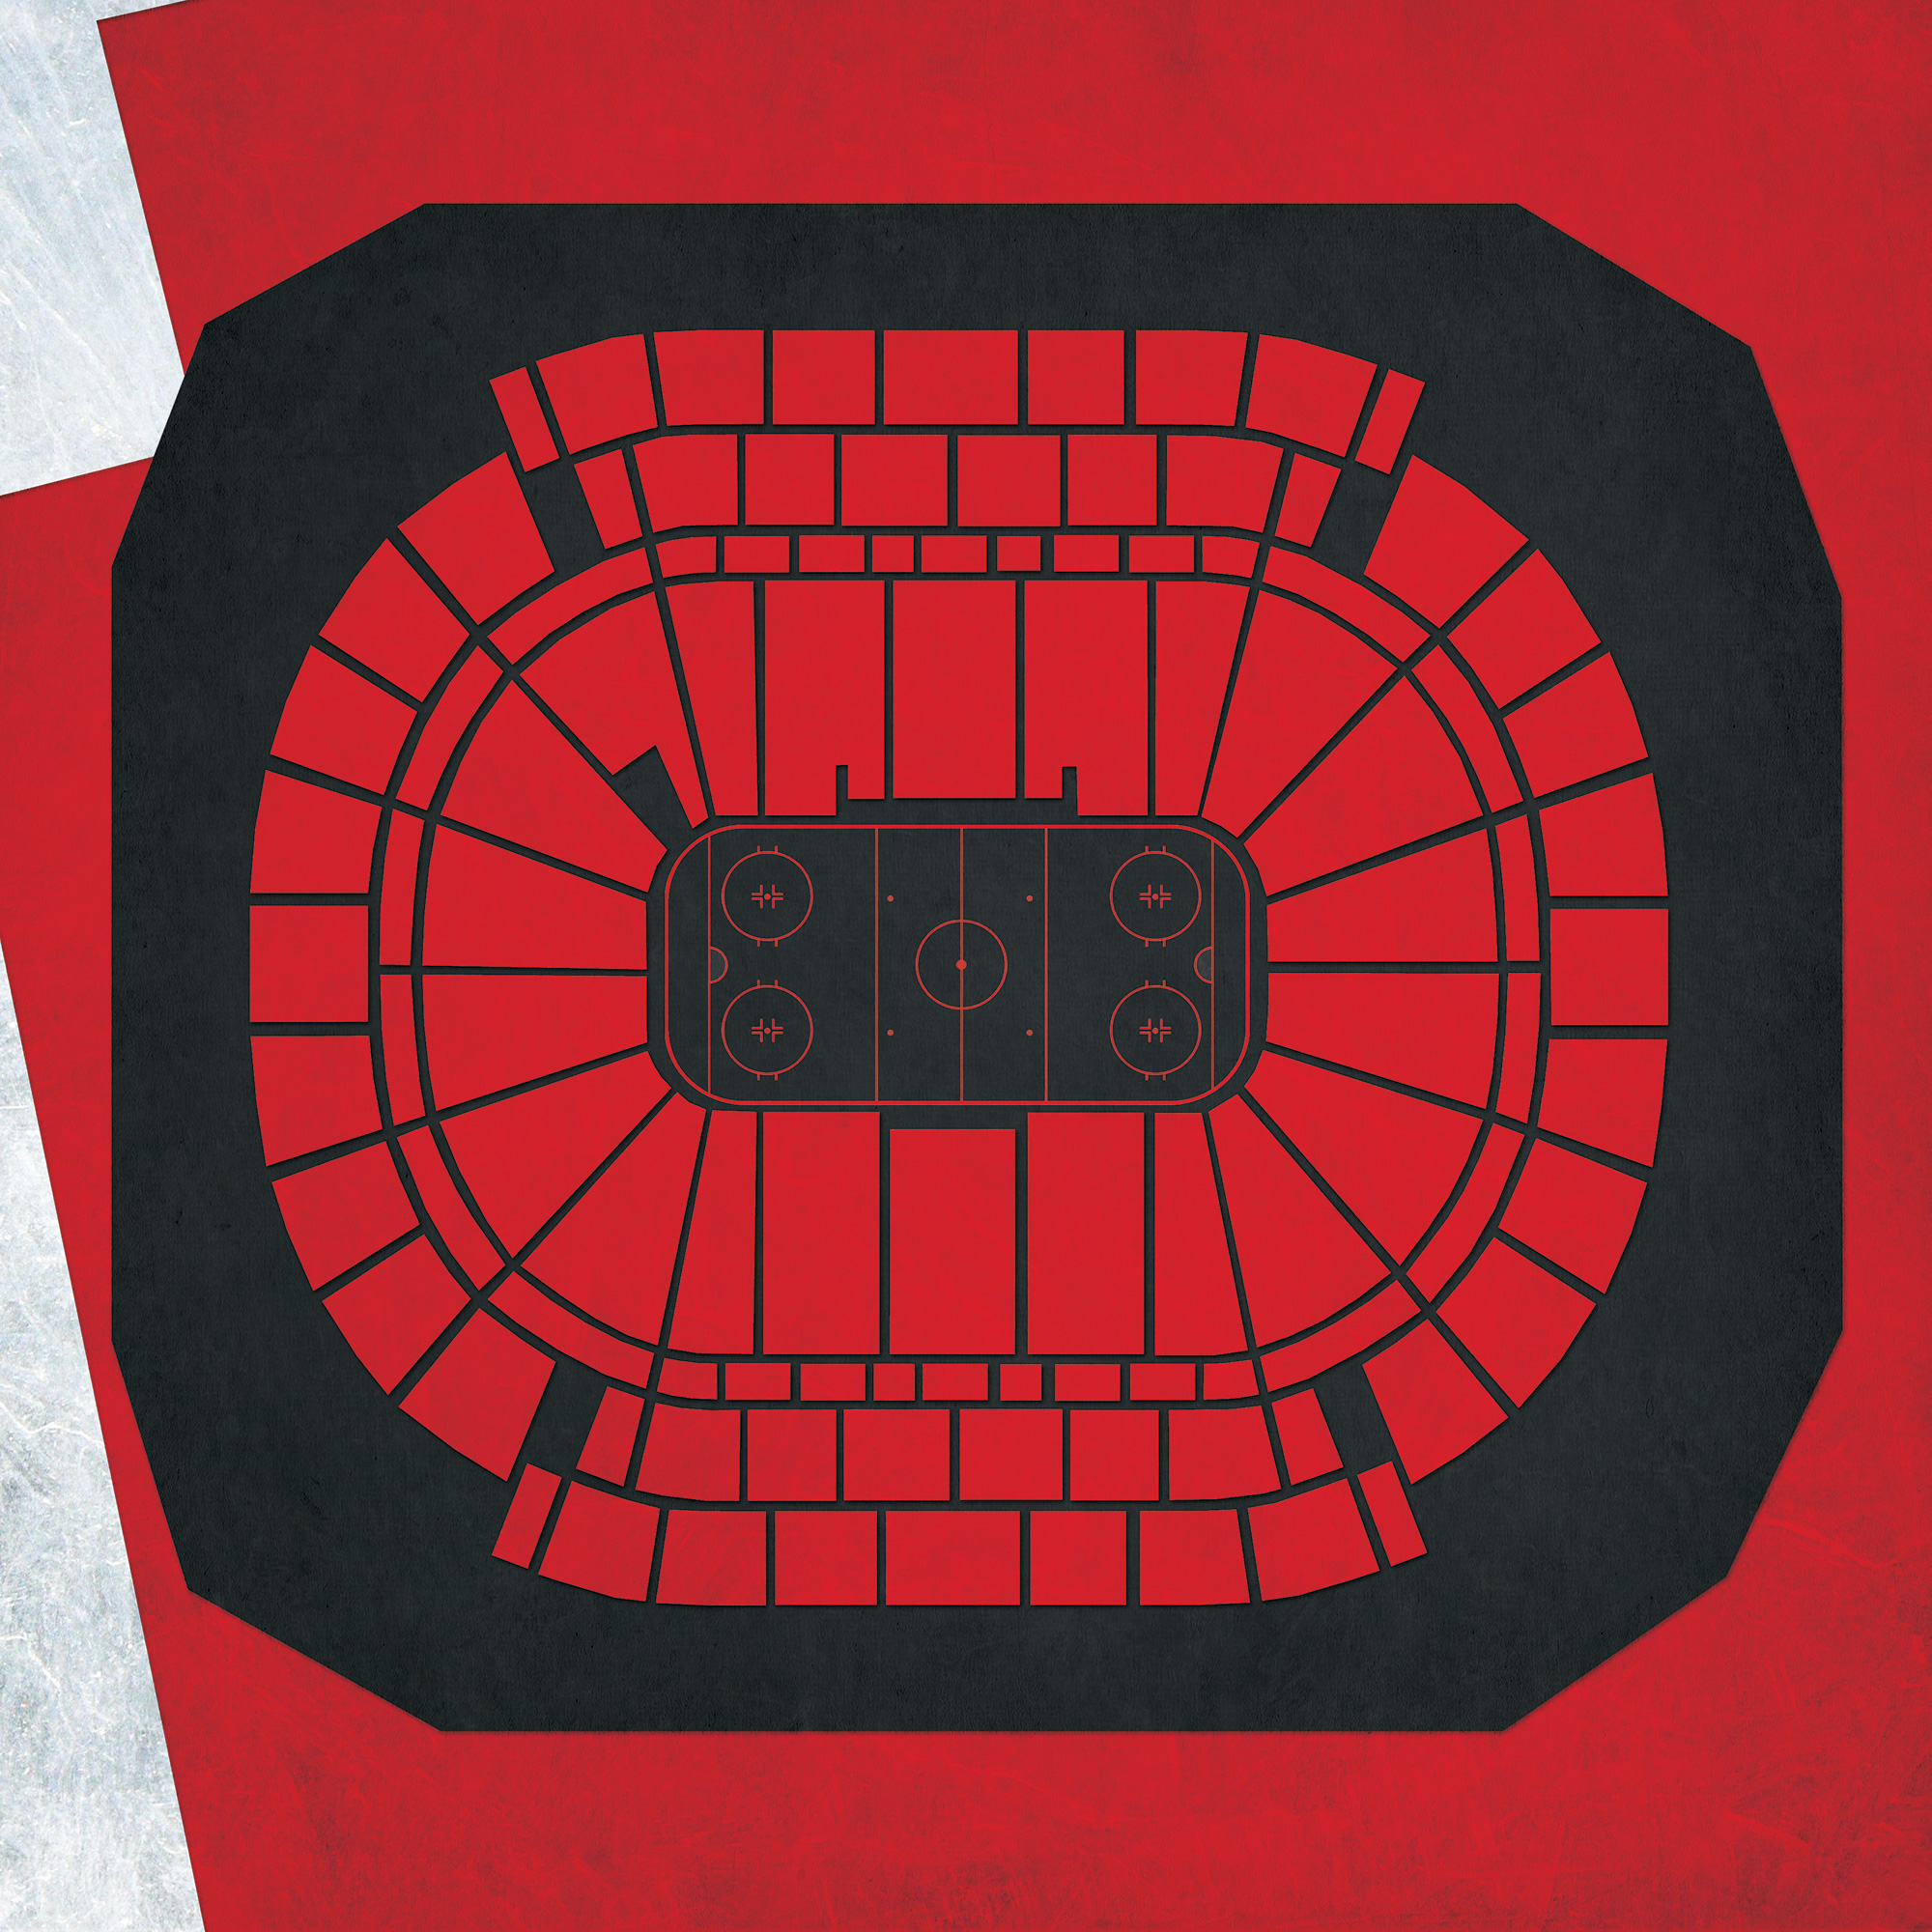 New Jersey Devils // Prudential Center // New Jersey Devils Art // New  Jersey Devils Print // Hockey Art